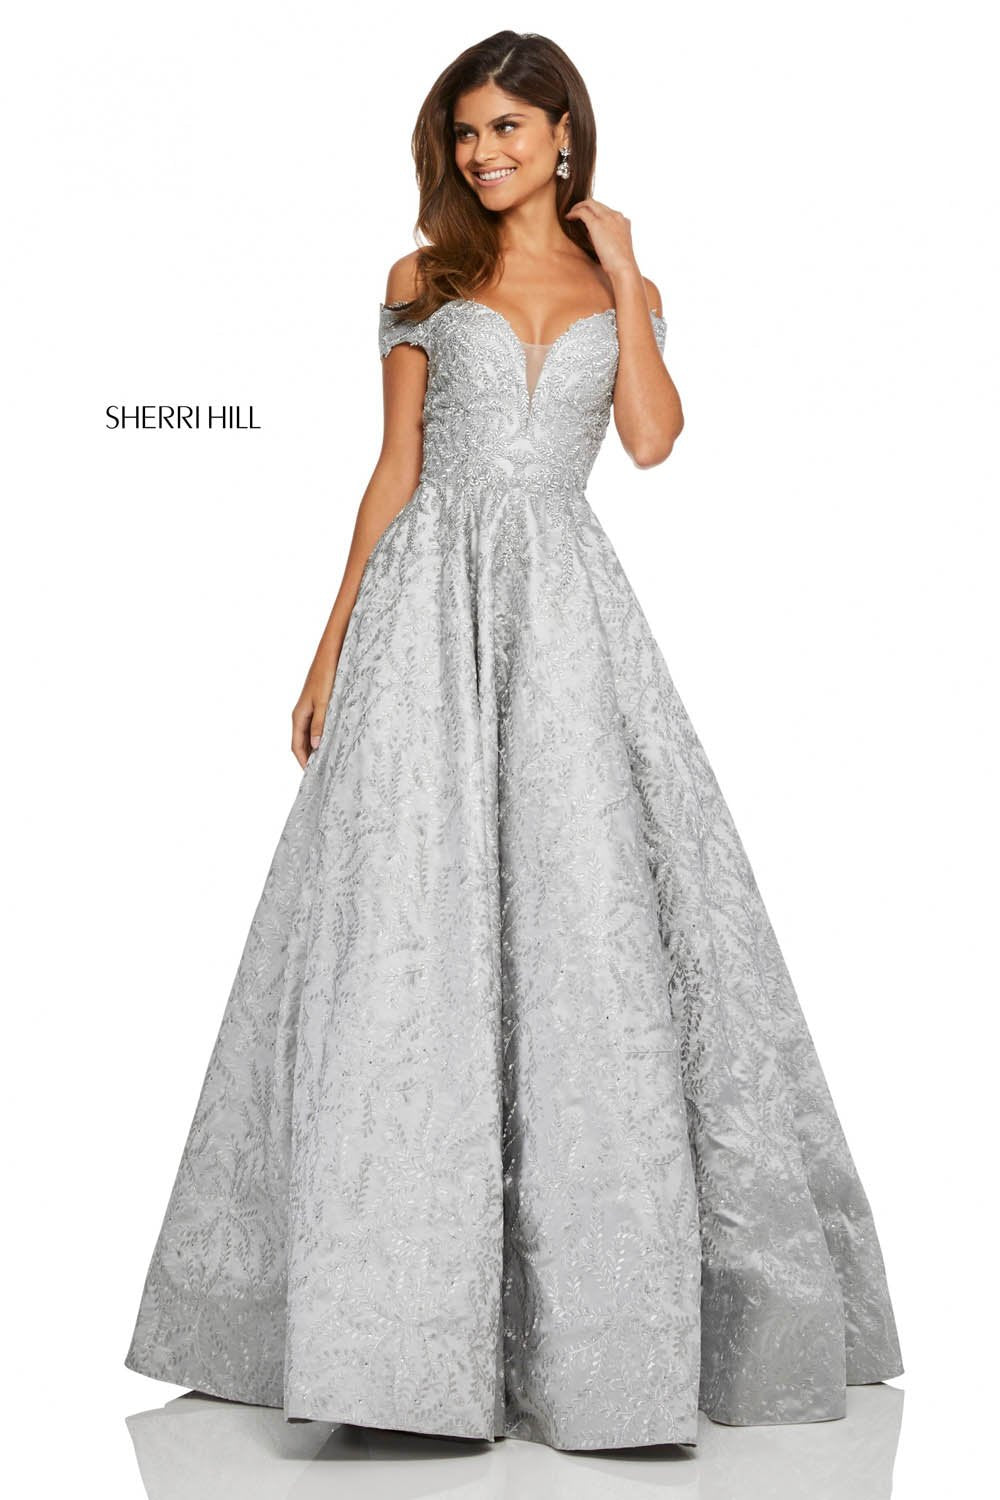 Sherri Hill 52507 dress images in these colors: Silver.